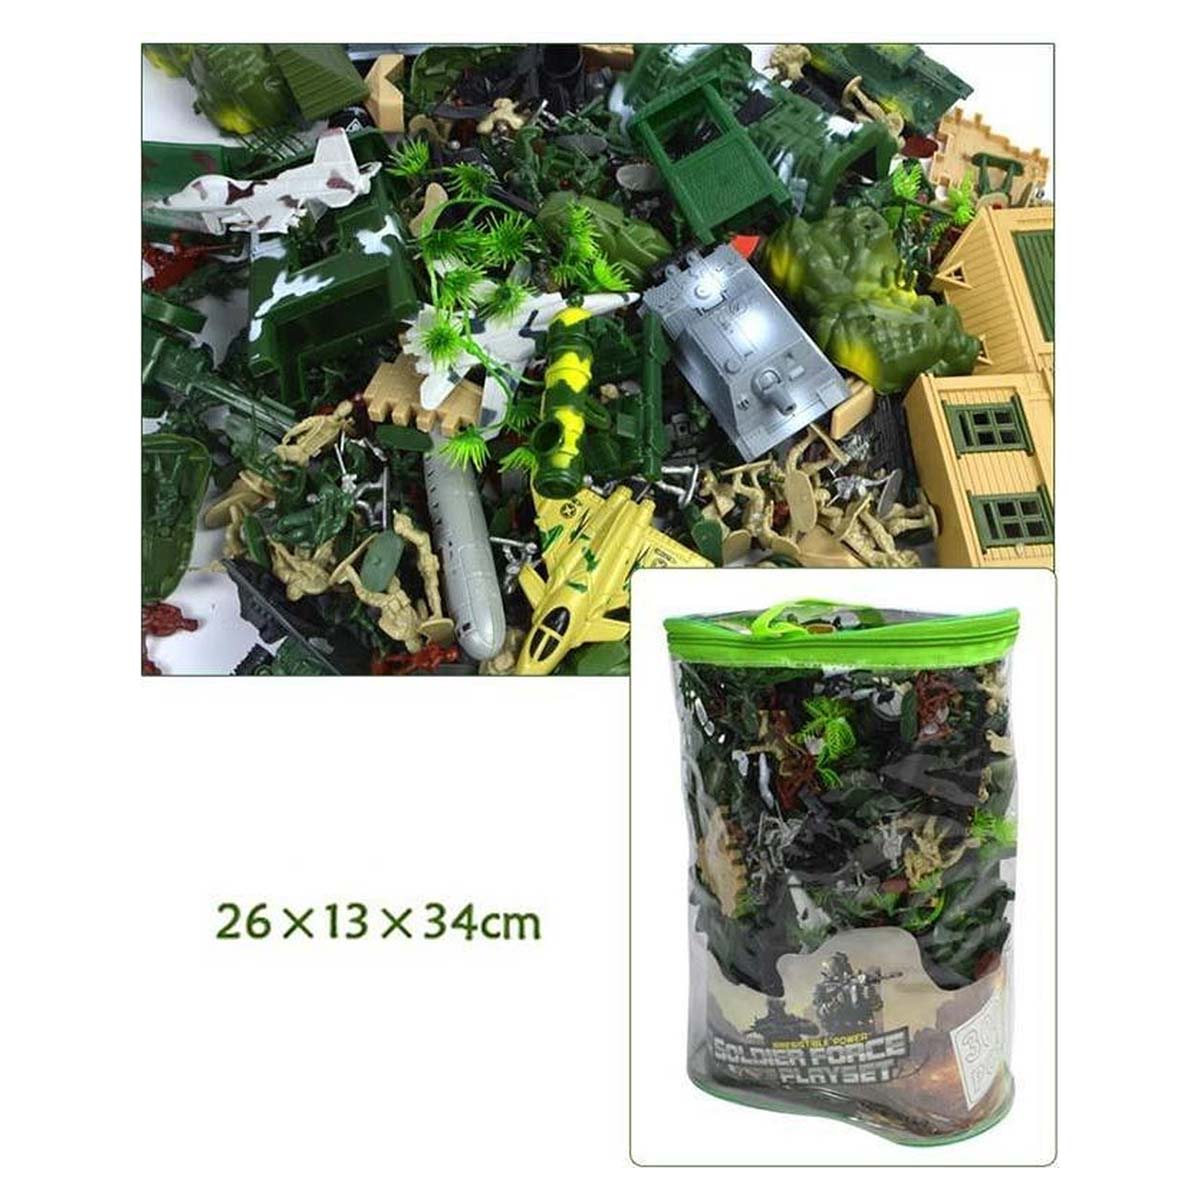 <tc>Ariko</tc> XXL Army play set 300 pieces | Including tanks, planes and buildings | Soldiers Toys | Soldier Set | | army forces